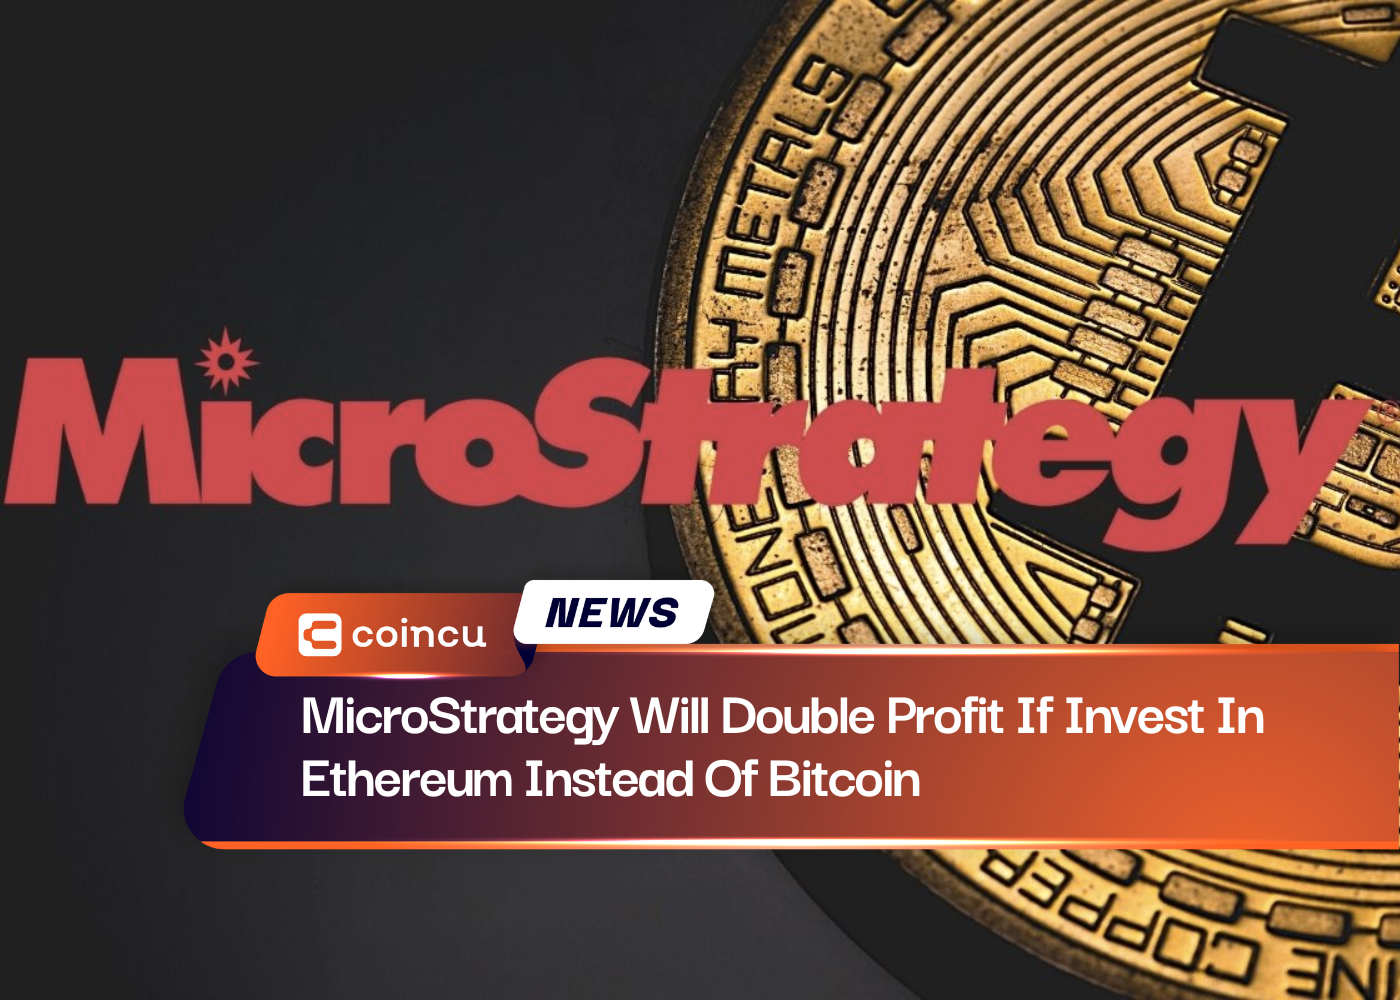 MicroStrategy Will Double Profit If Invest In Ethereum Instead Of Bitcoin